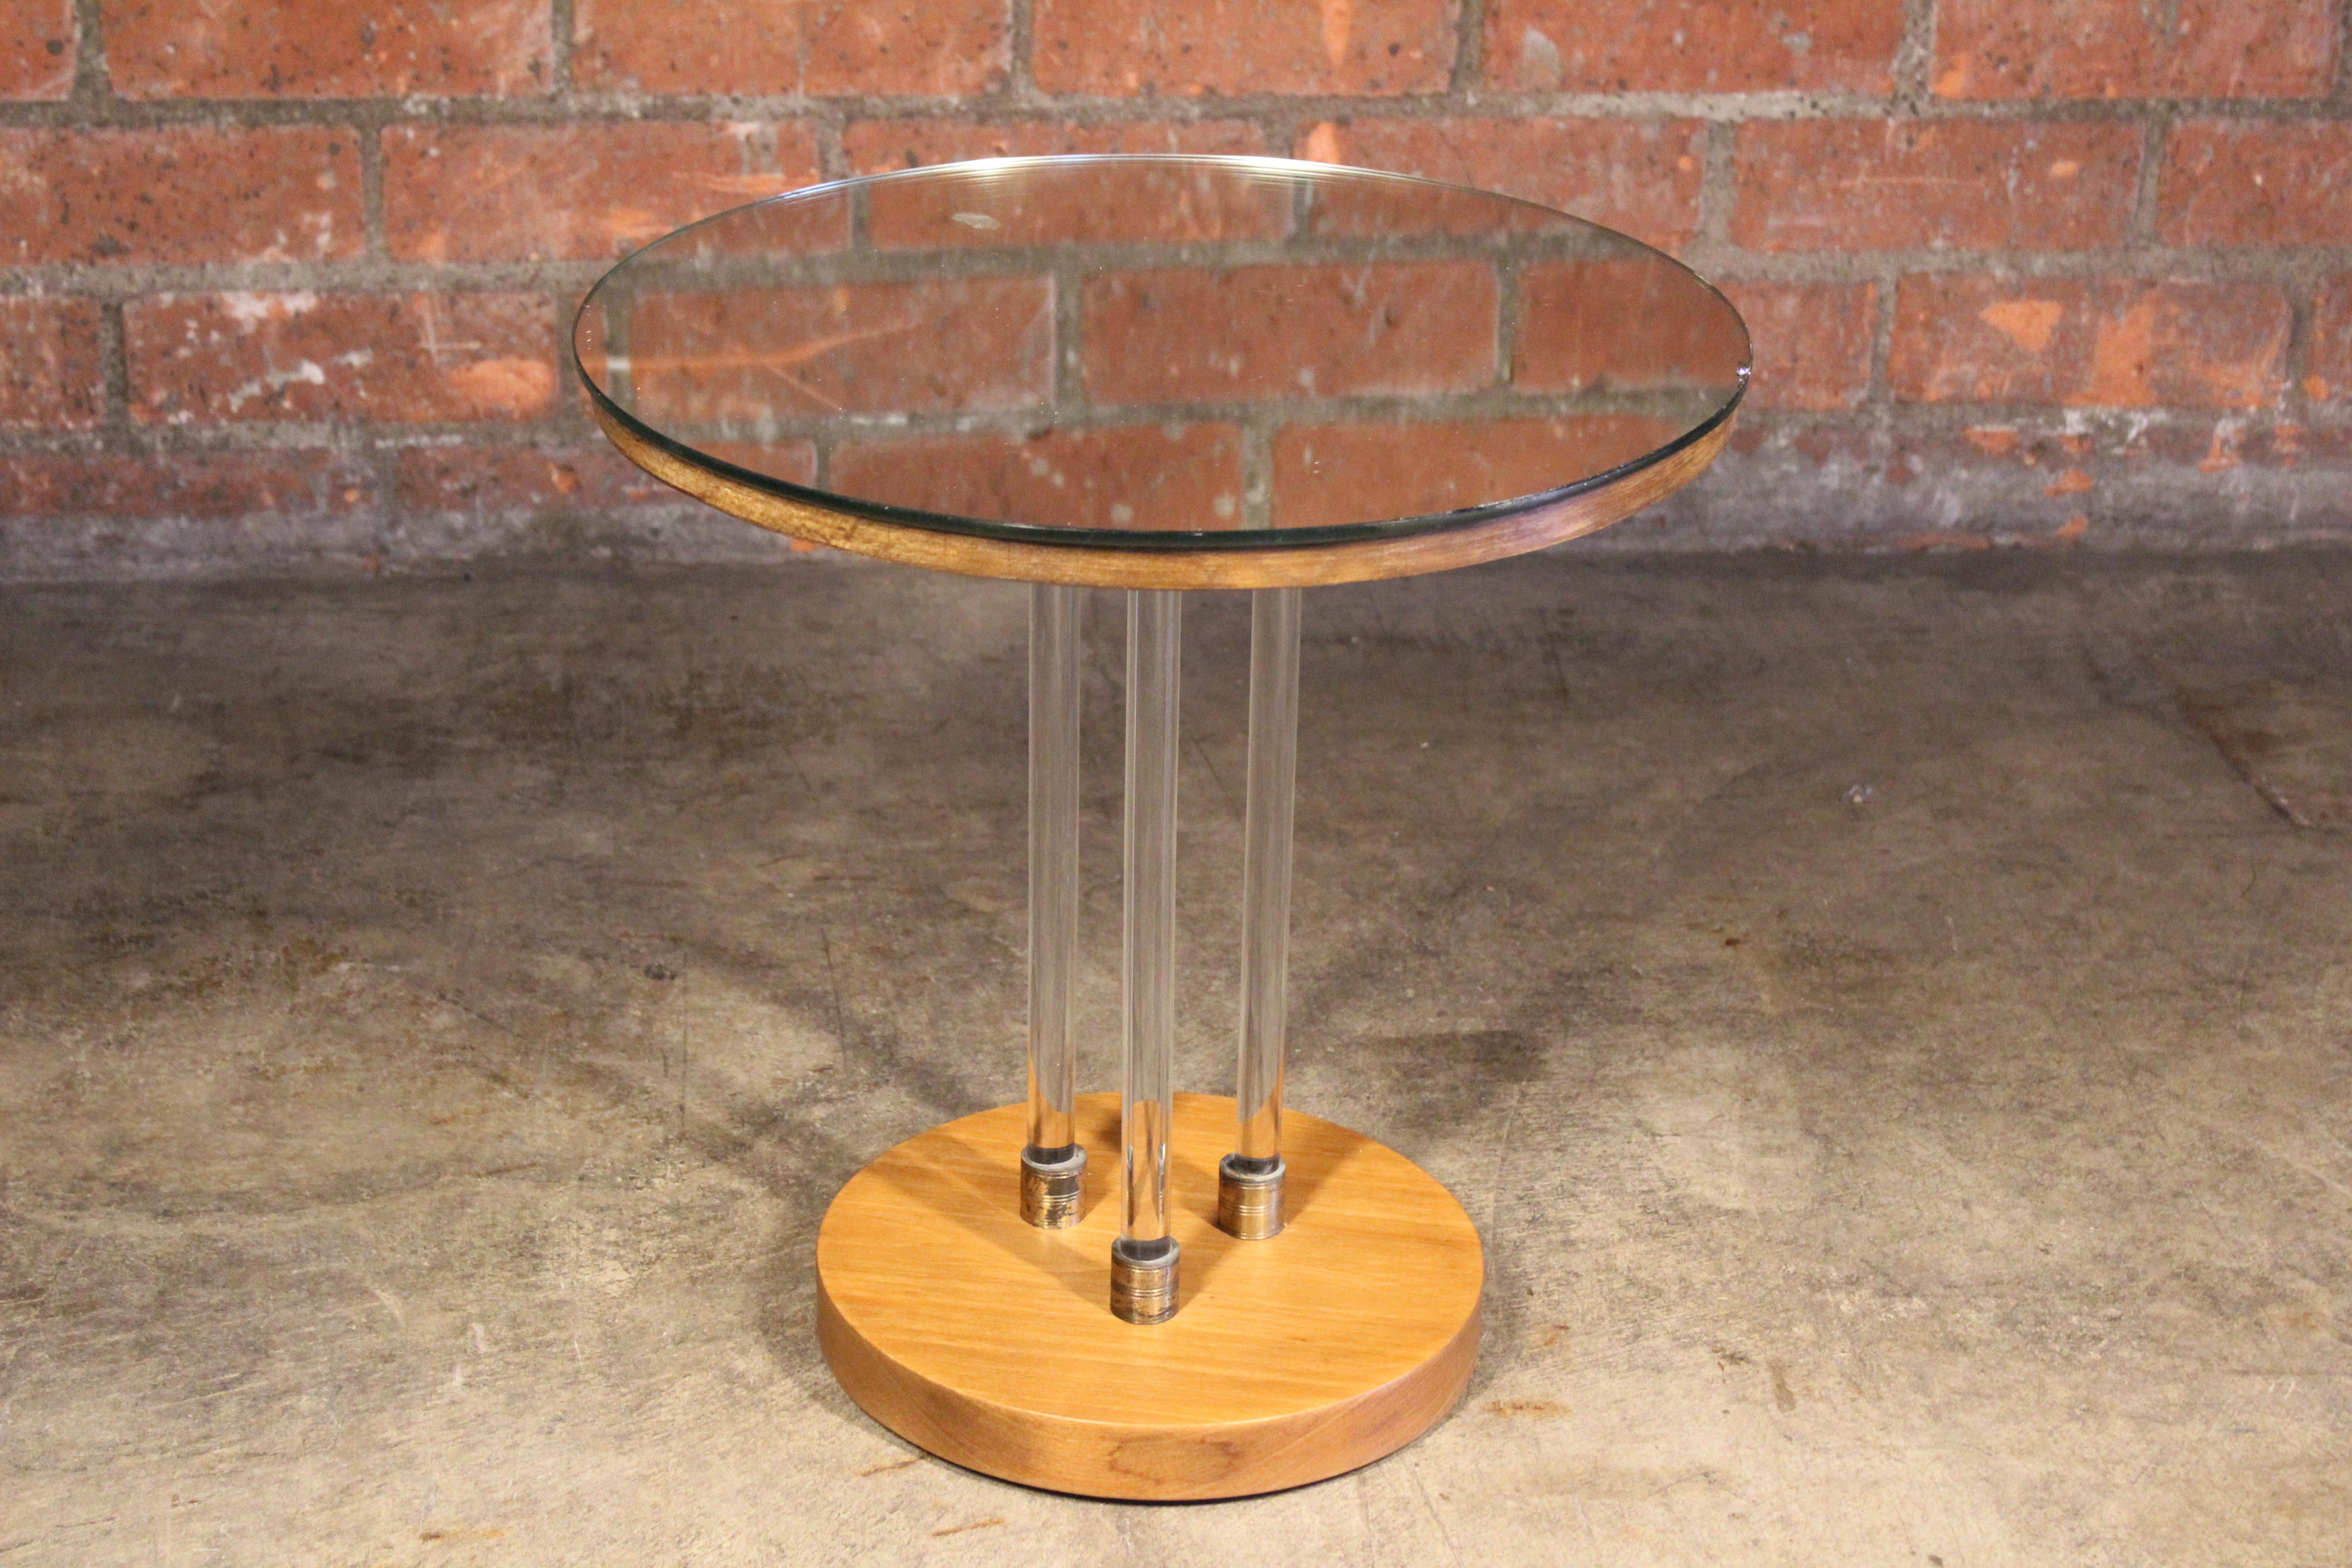 A unique side table with a three-column glass base and mirrored top. Features a solid wood base with brass accents. The wood base has been refinished. Glass top is original to the table and shows minor signs of wear.